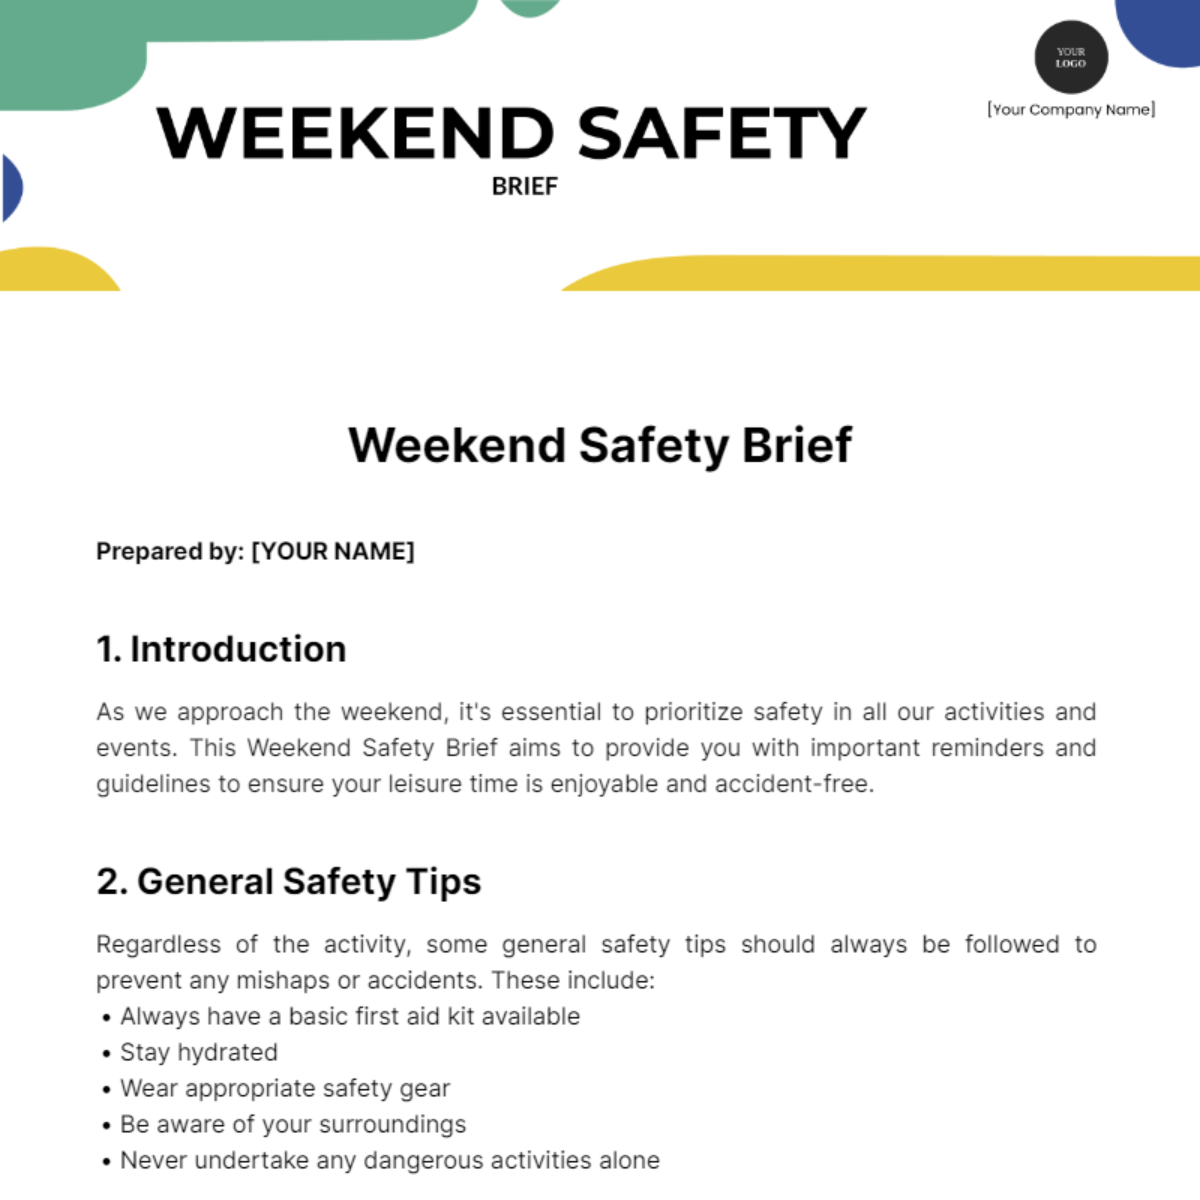 Safety Brief Template - Edit Online & Download Example